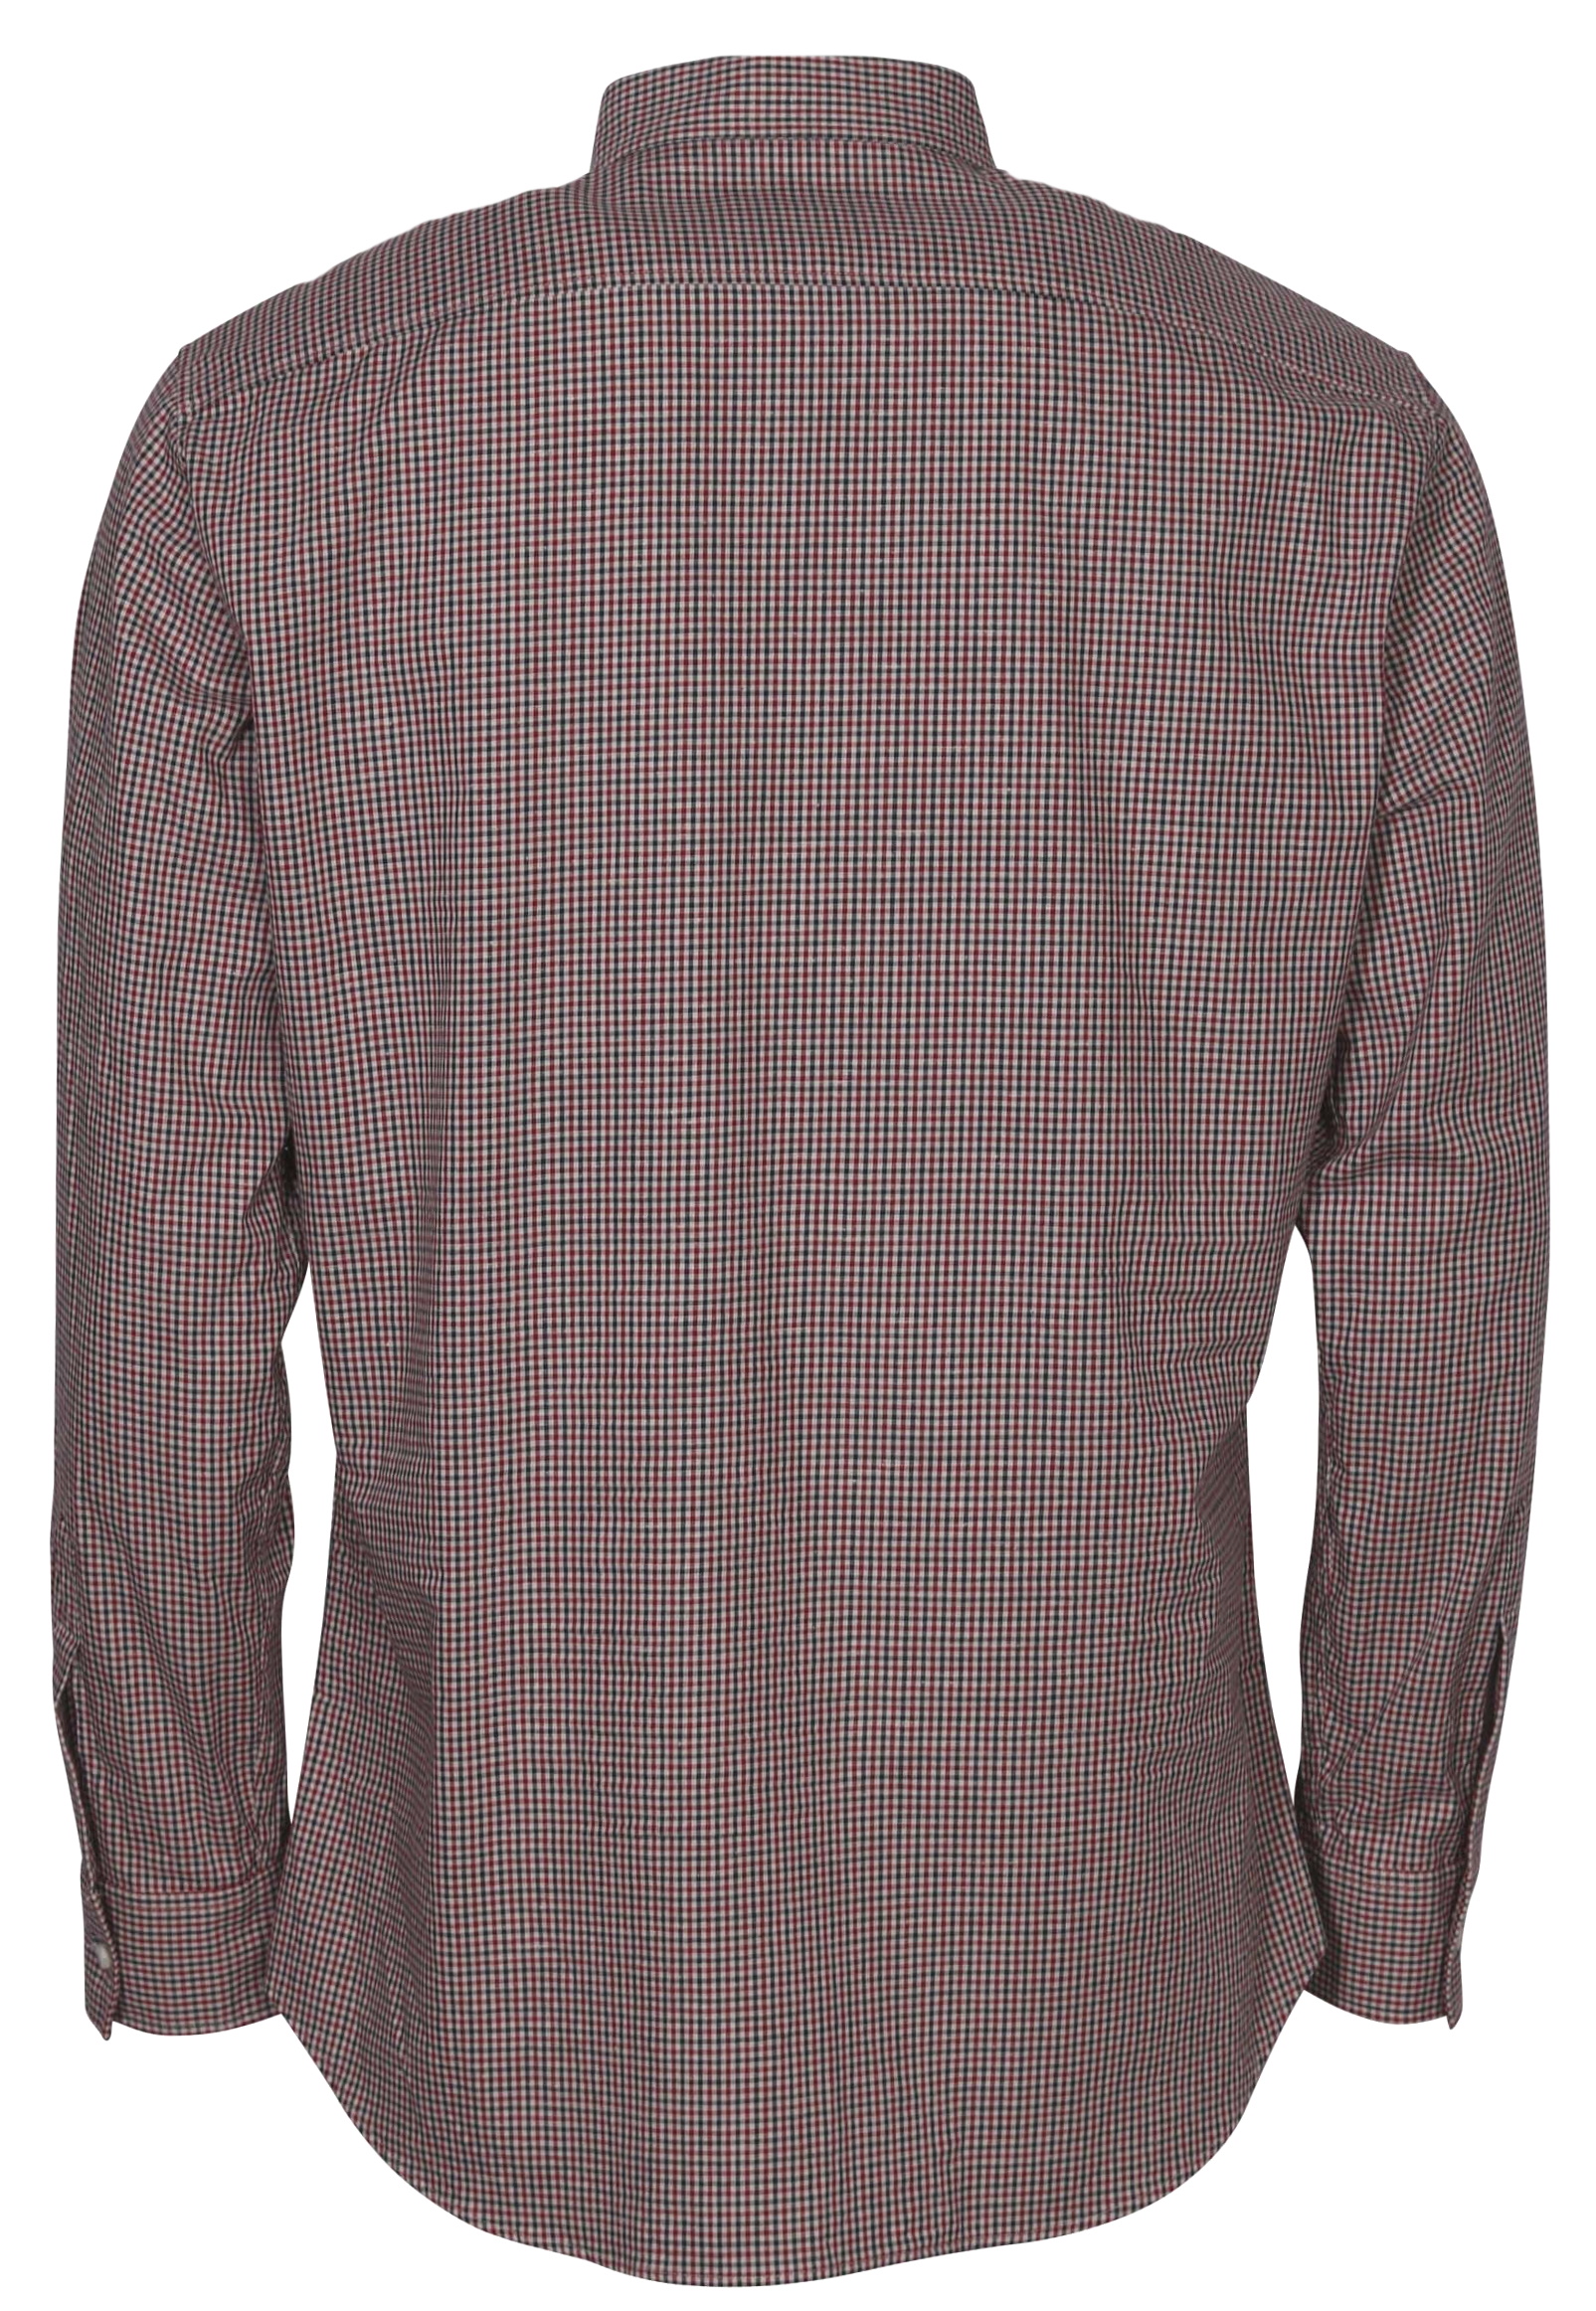 Dsquared Check Shirt Red/Navy/Beige